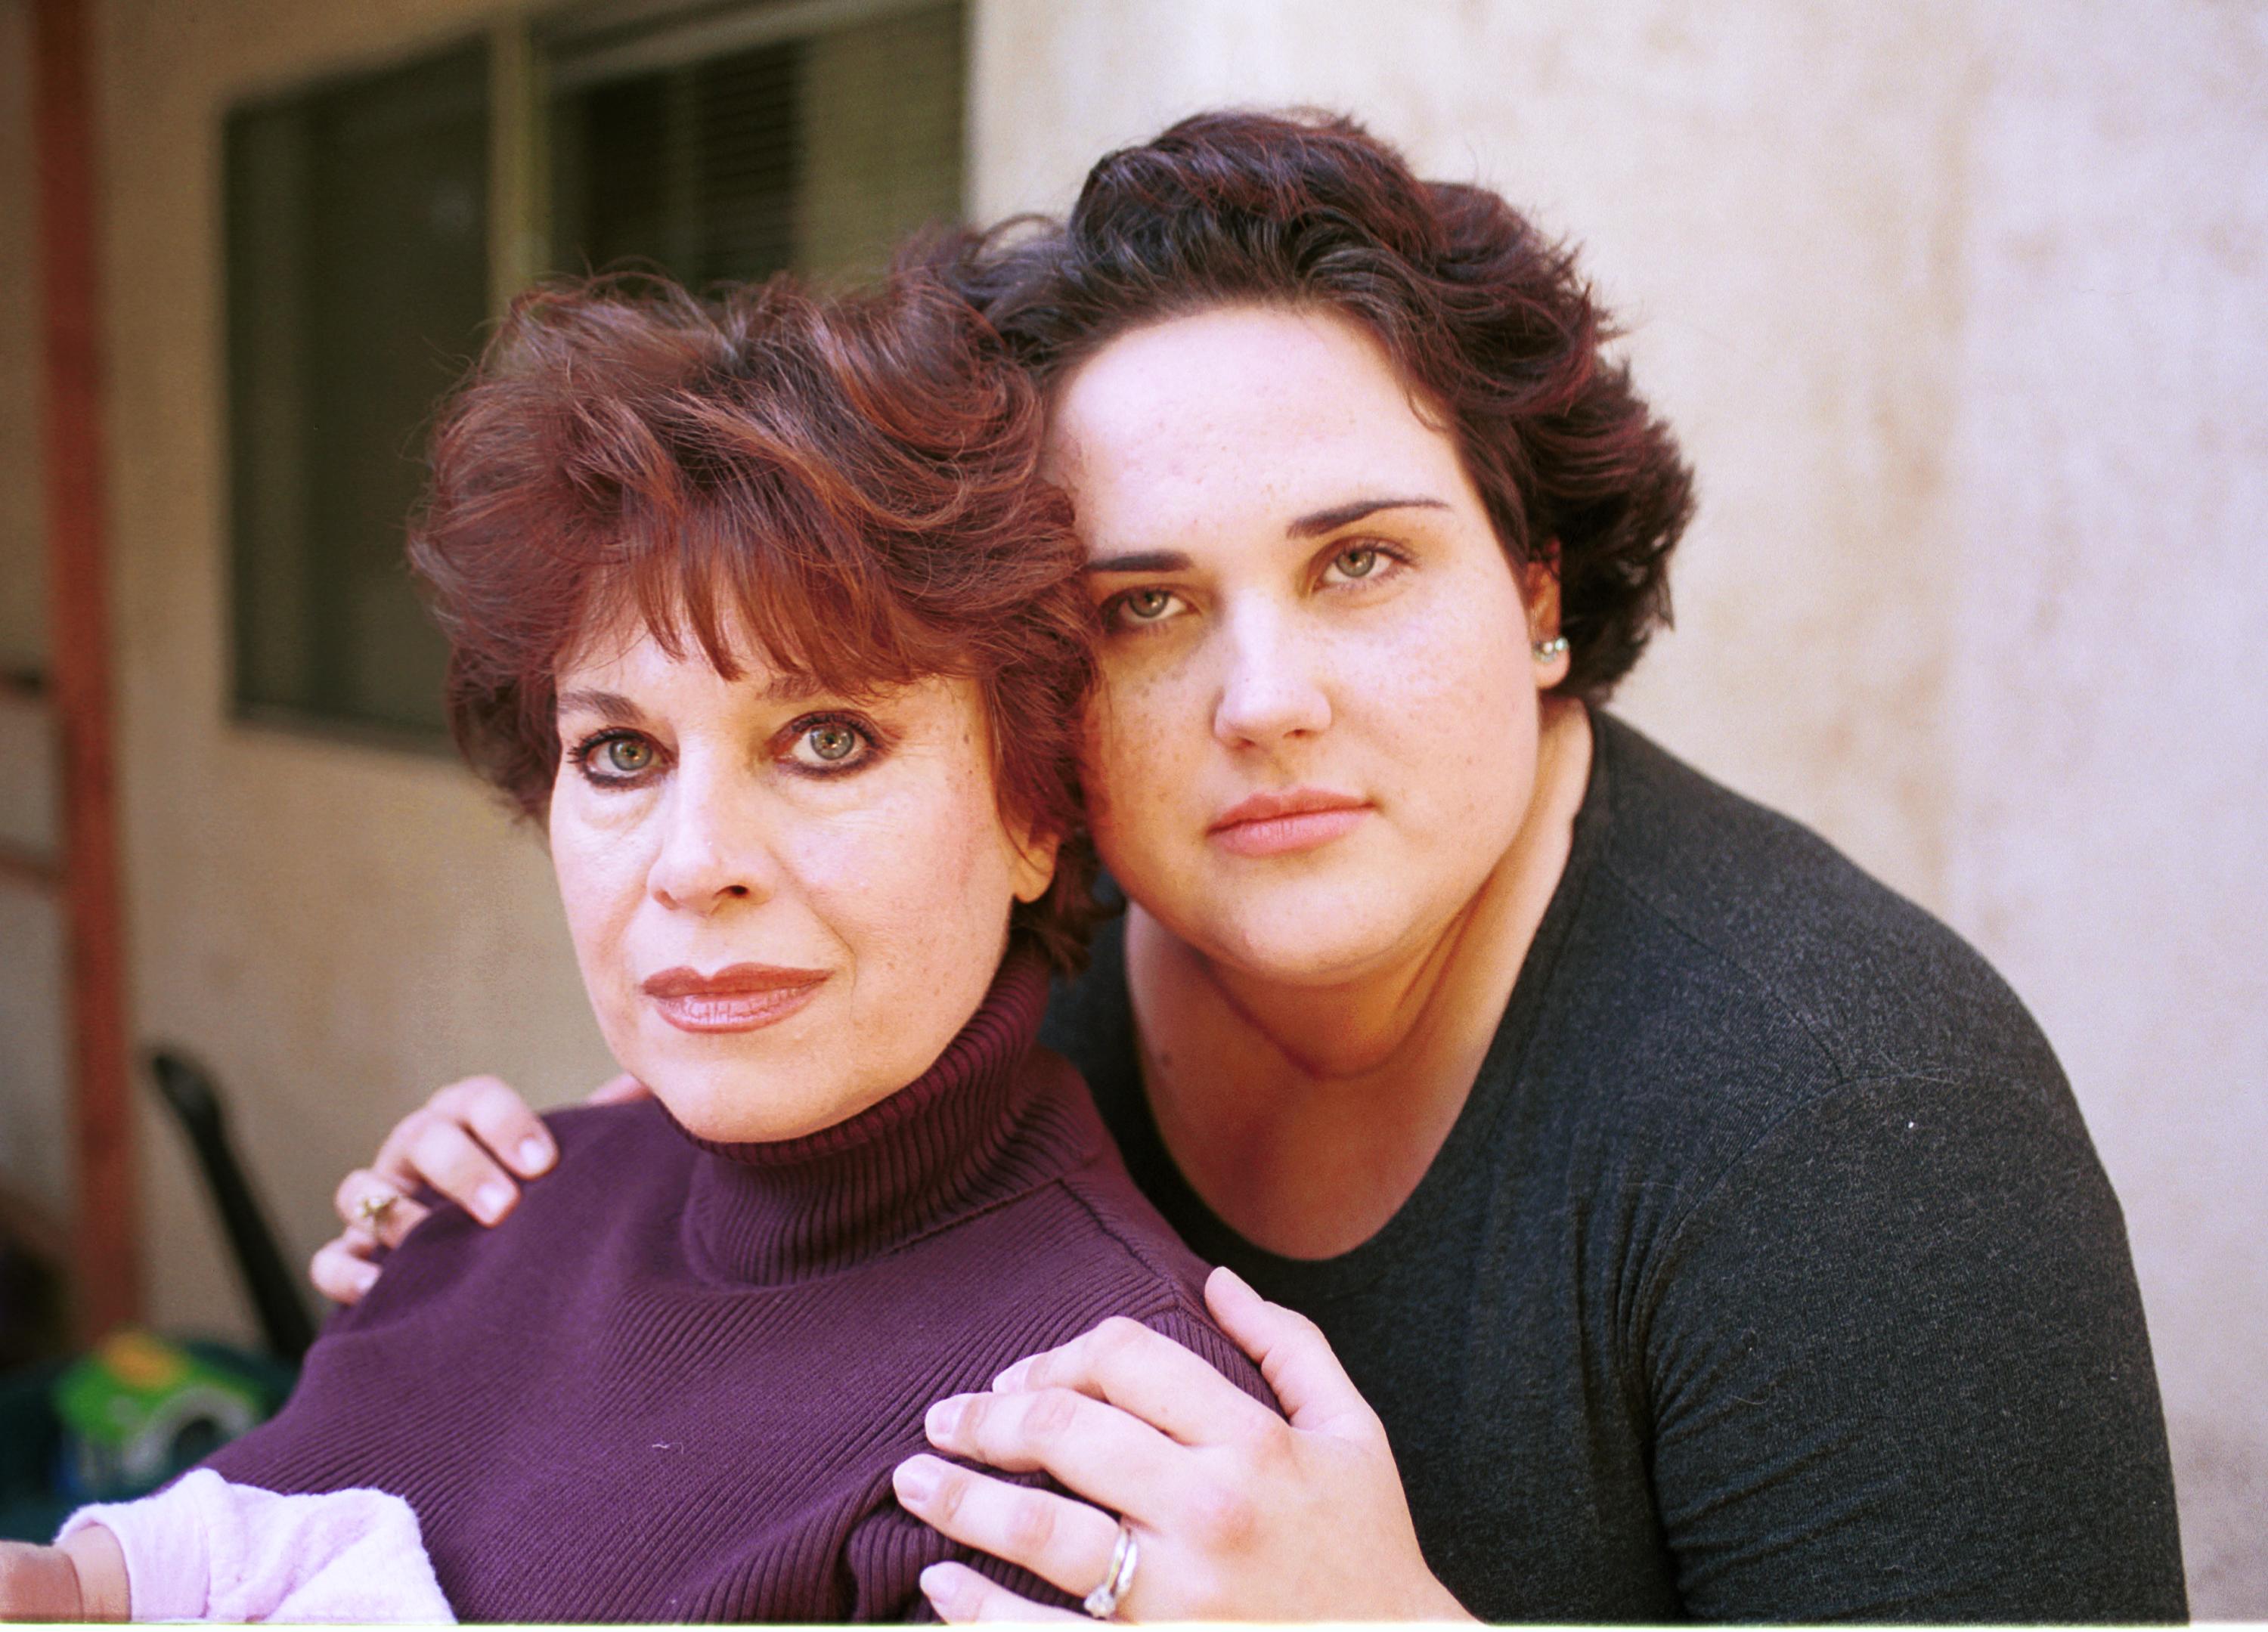 Lana Wood and Evan Taylor Maldonado in Thousand Oaks, California, on September 28, 2000. | Source: Getty Images